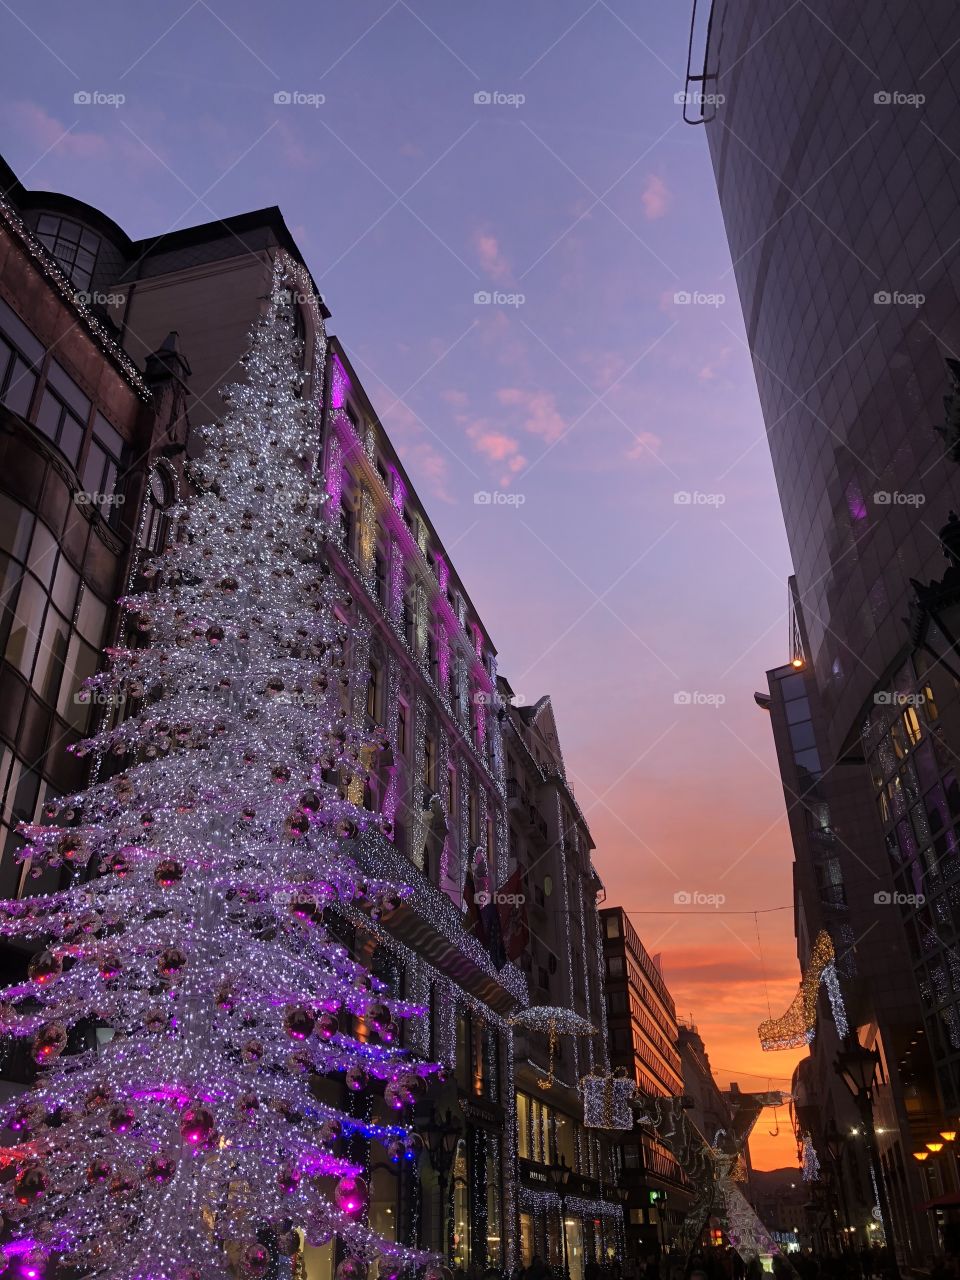 Christmas sunset #fashionstreetbudapest. What a sight! So beautiful, the evening sky beamed across Budapest. 